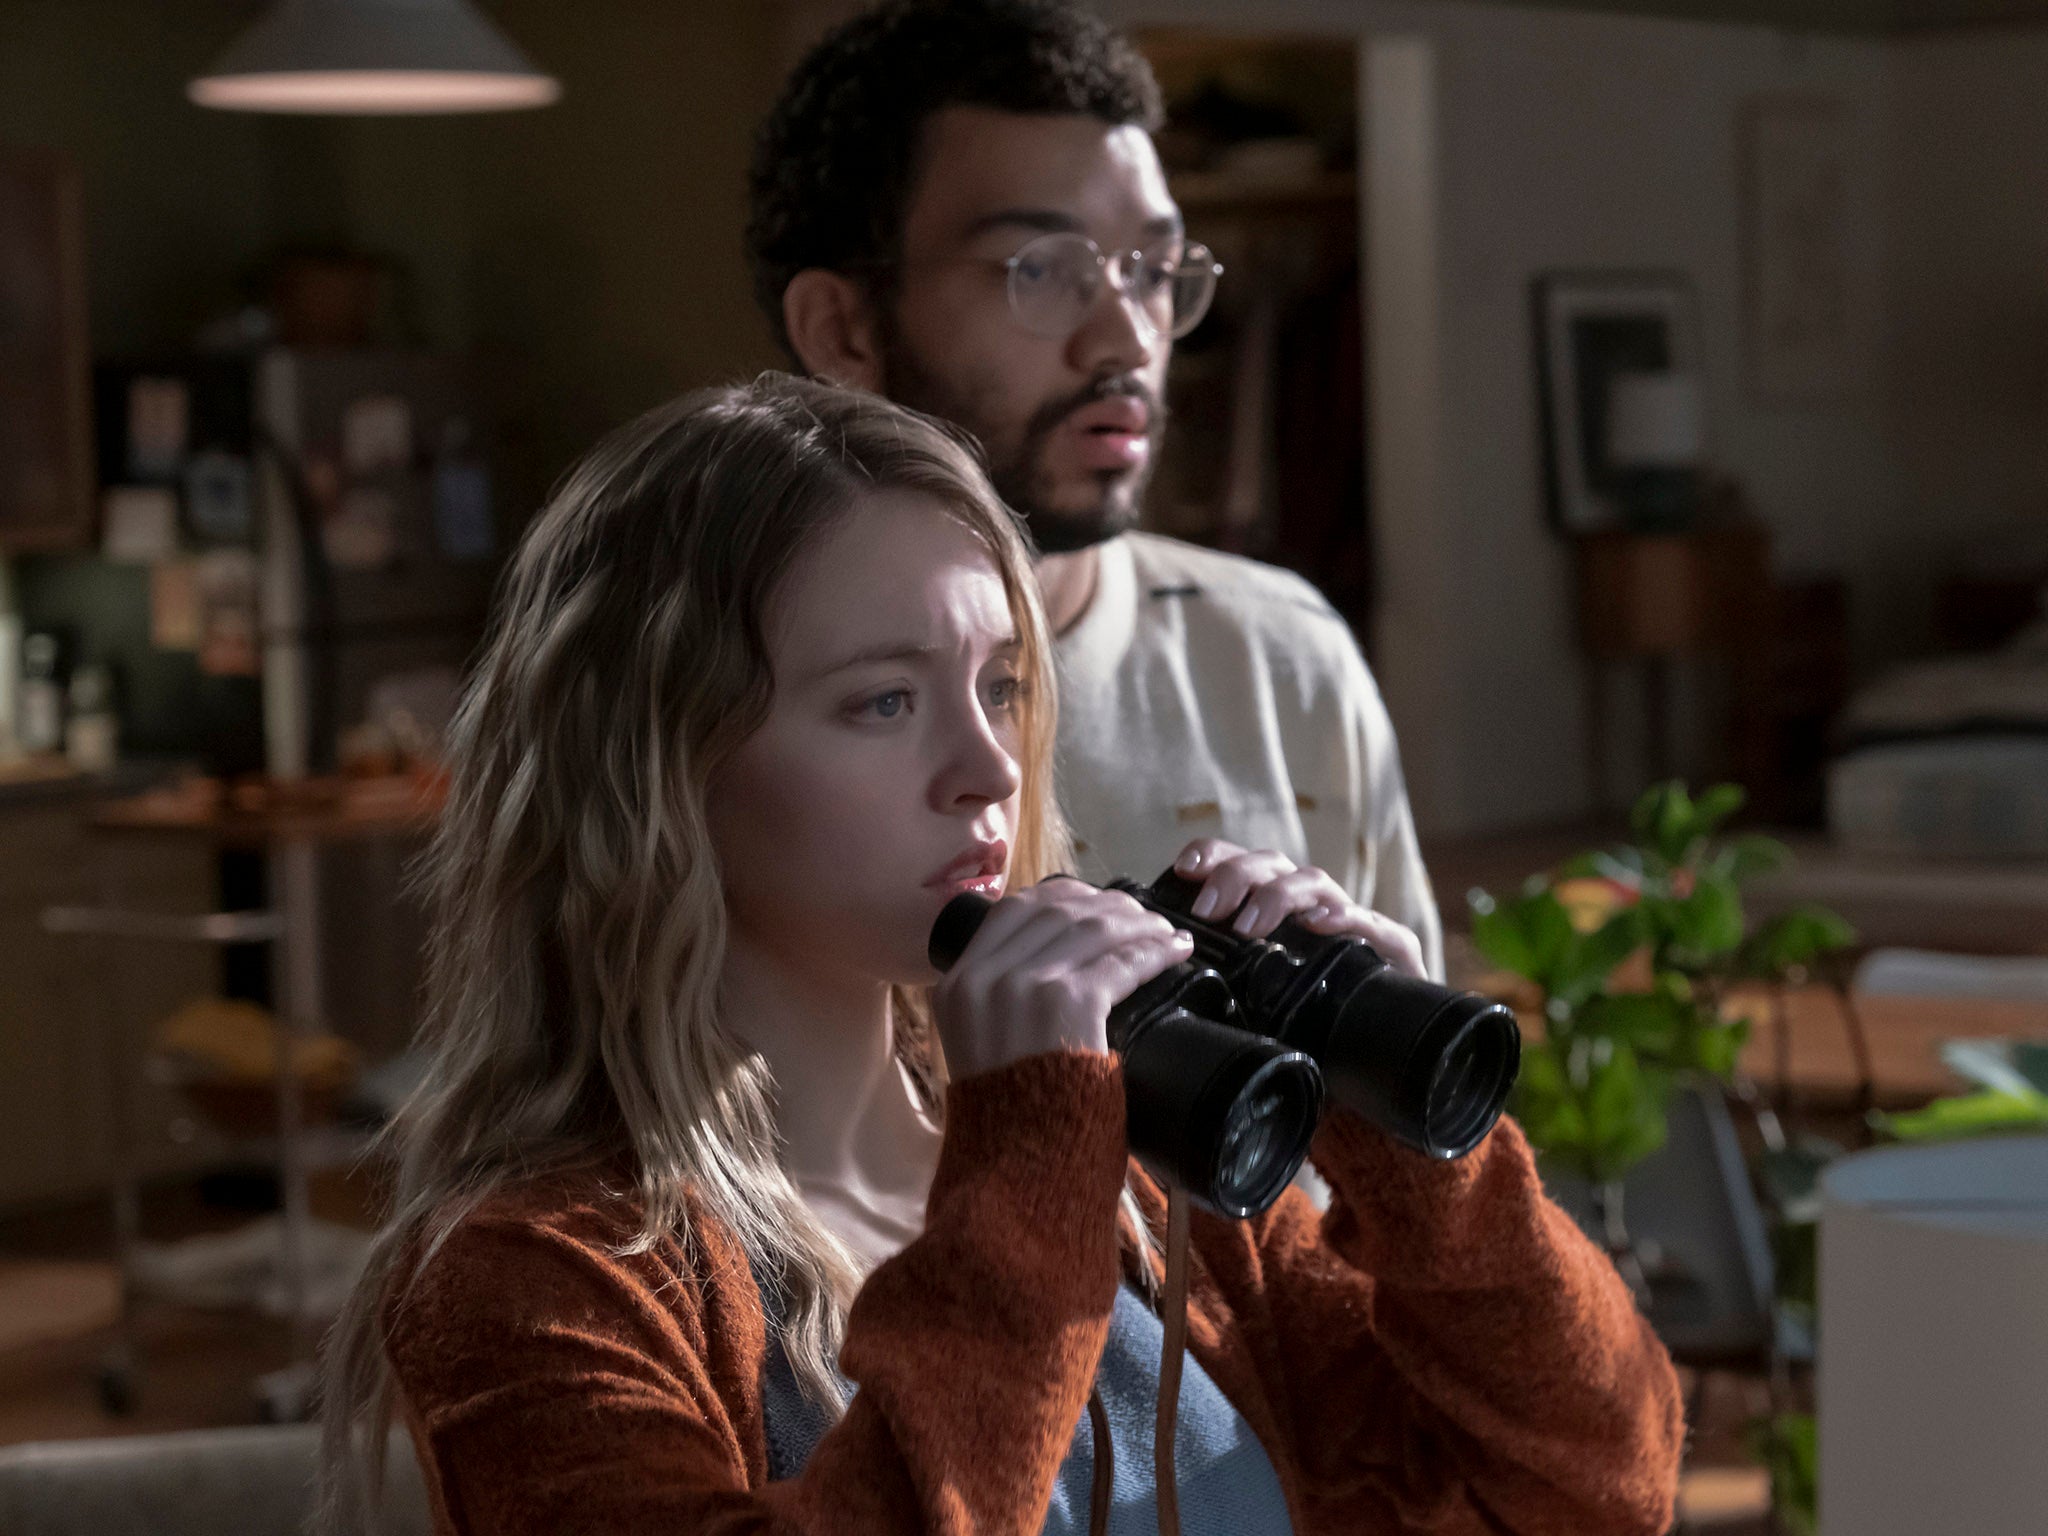 Sydney Sweeney and Justice Smith in ‘The Voyeurs'